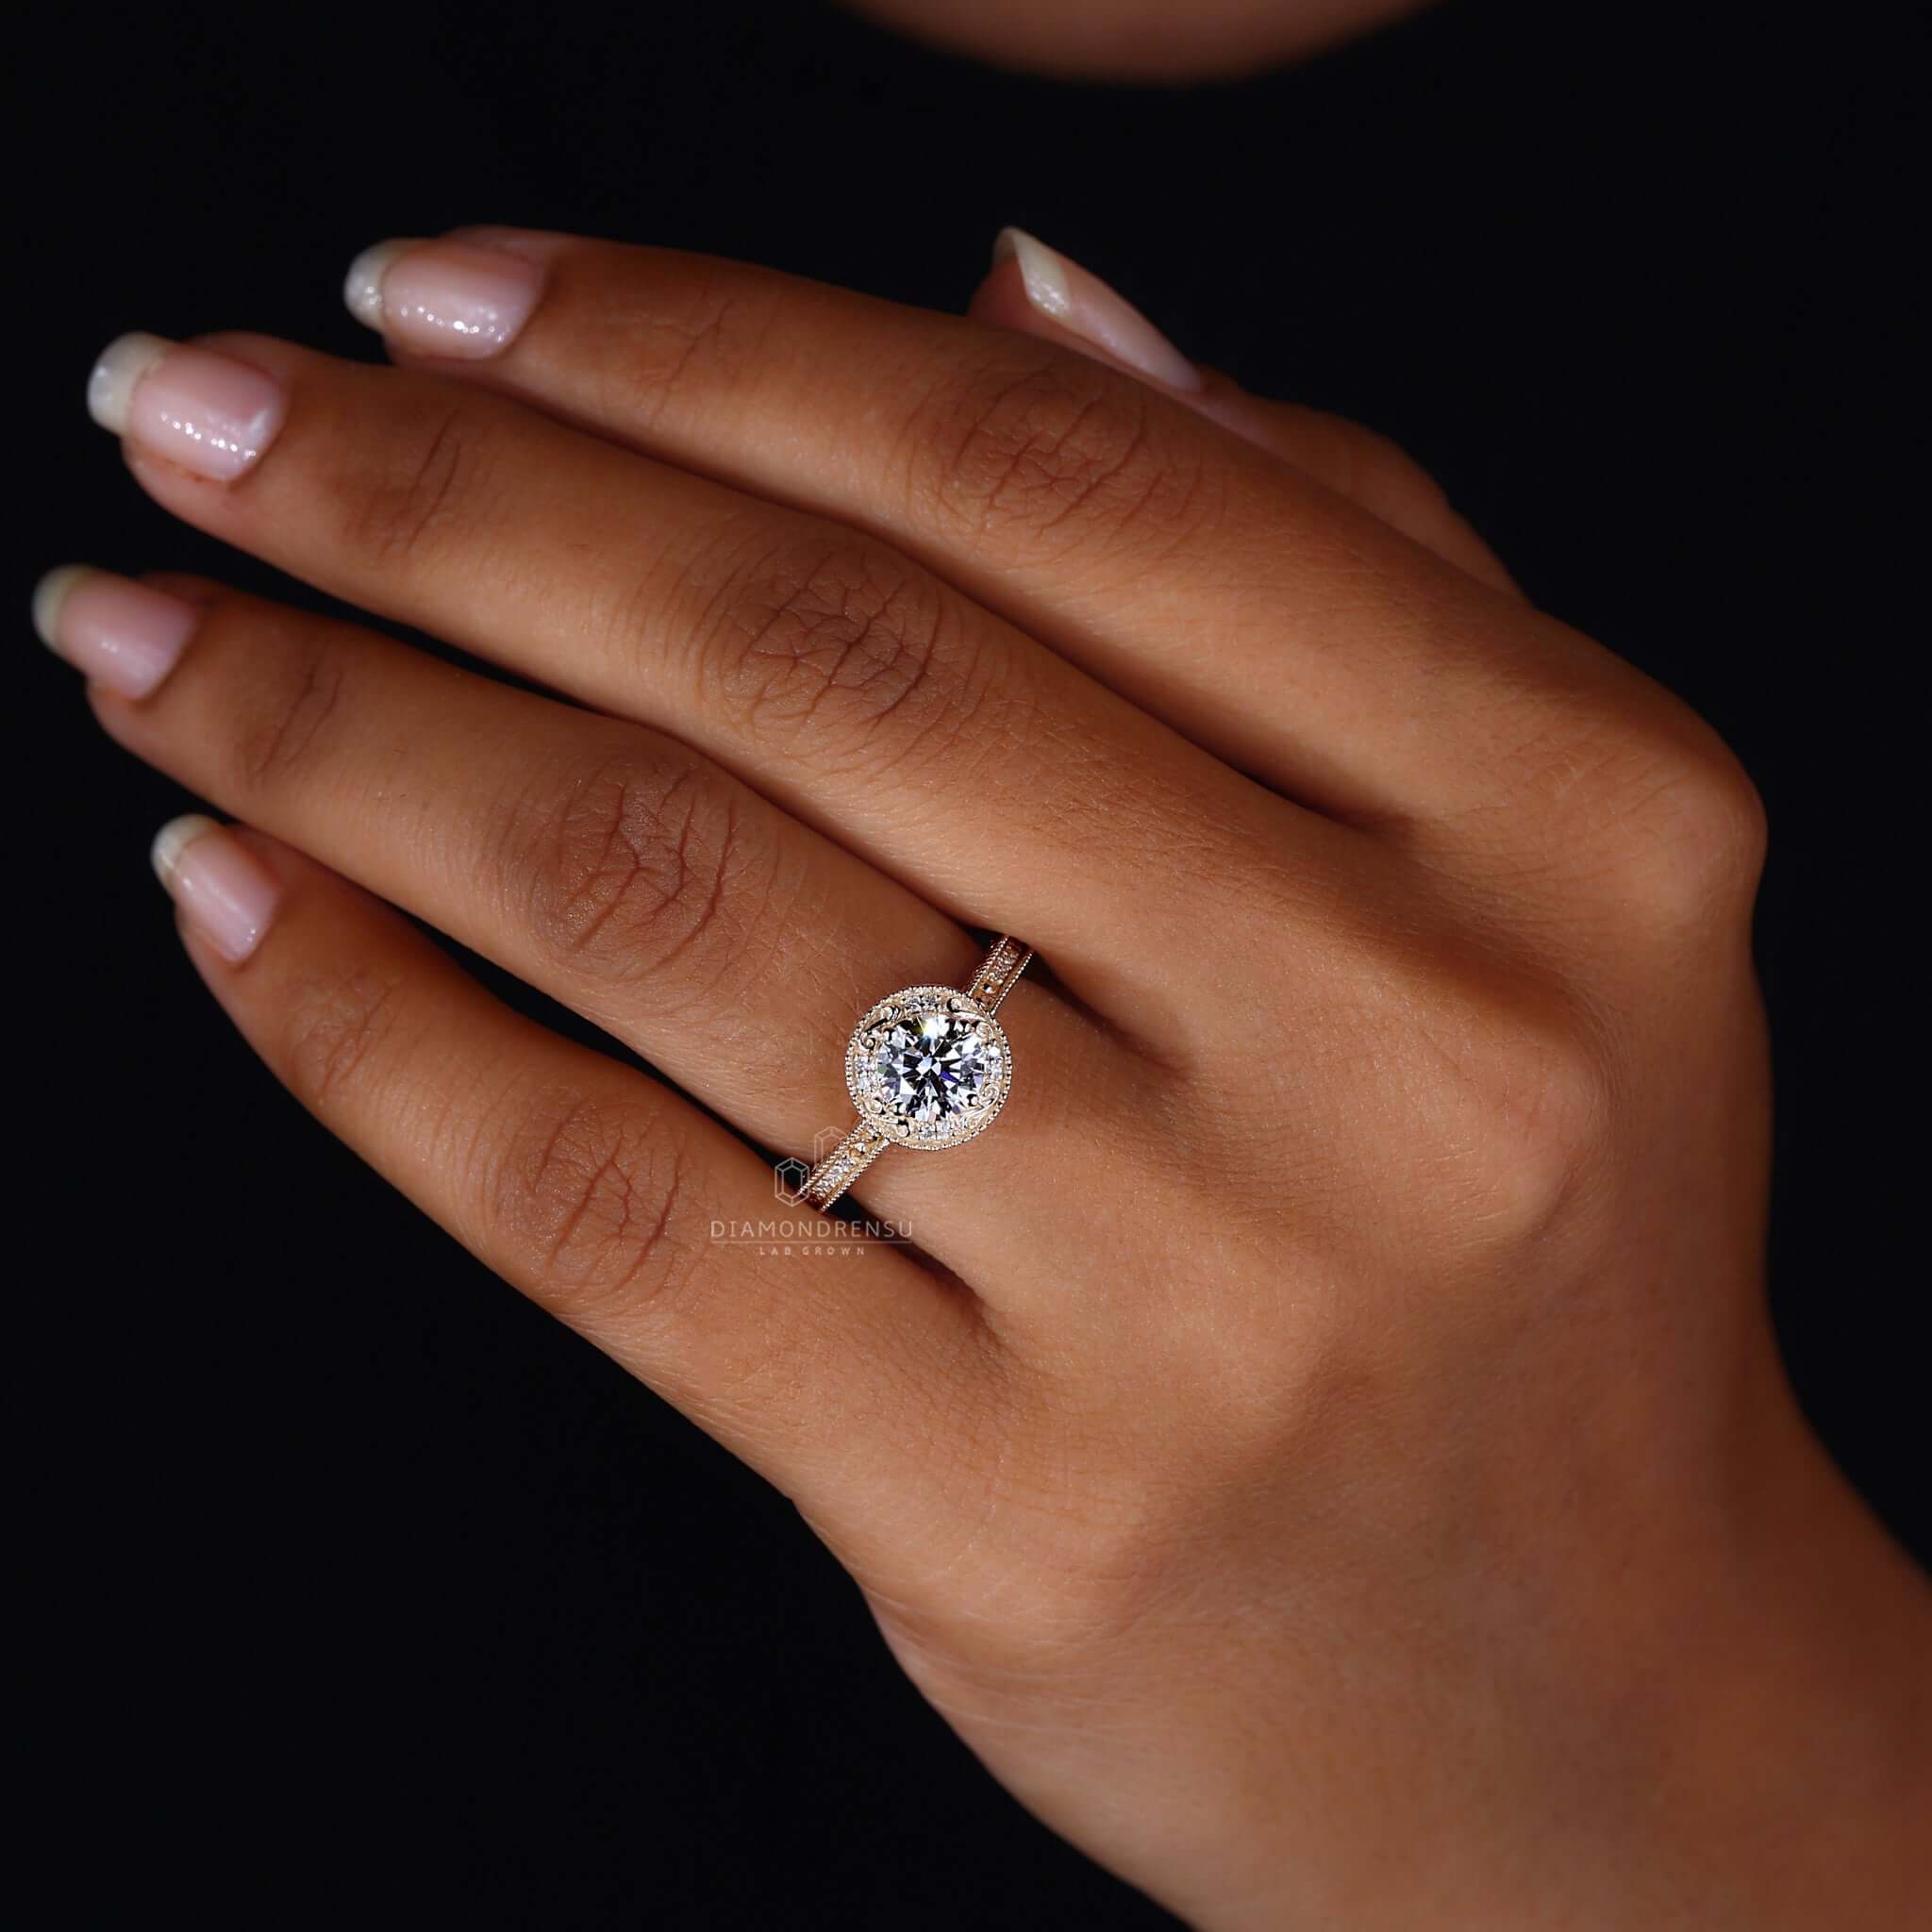 Hand wearing a round lab-grown diamond ring, emphasizing its ethical brilliance and modern design